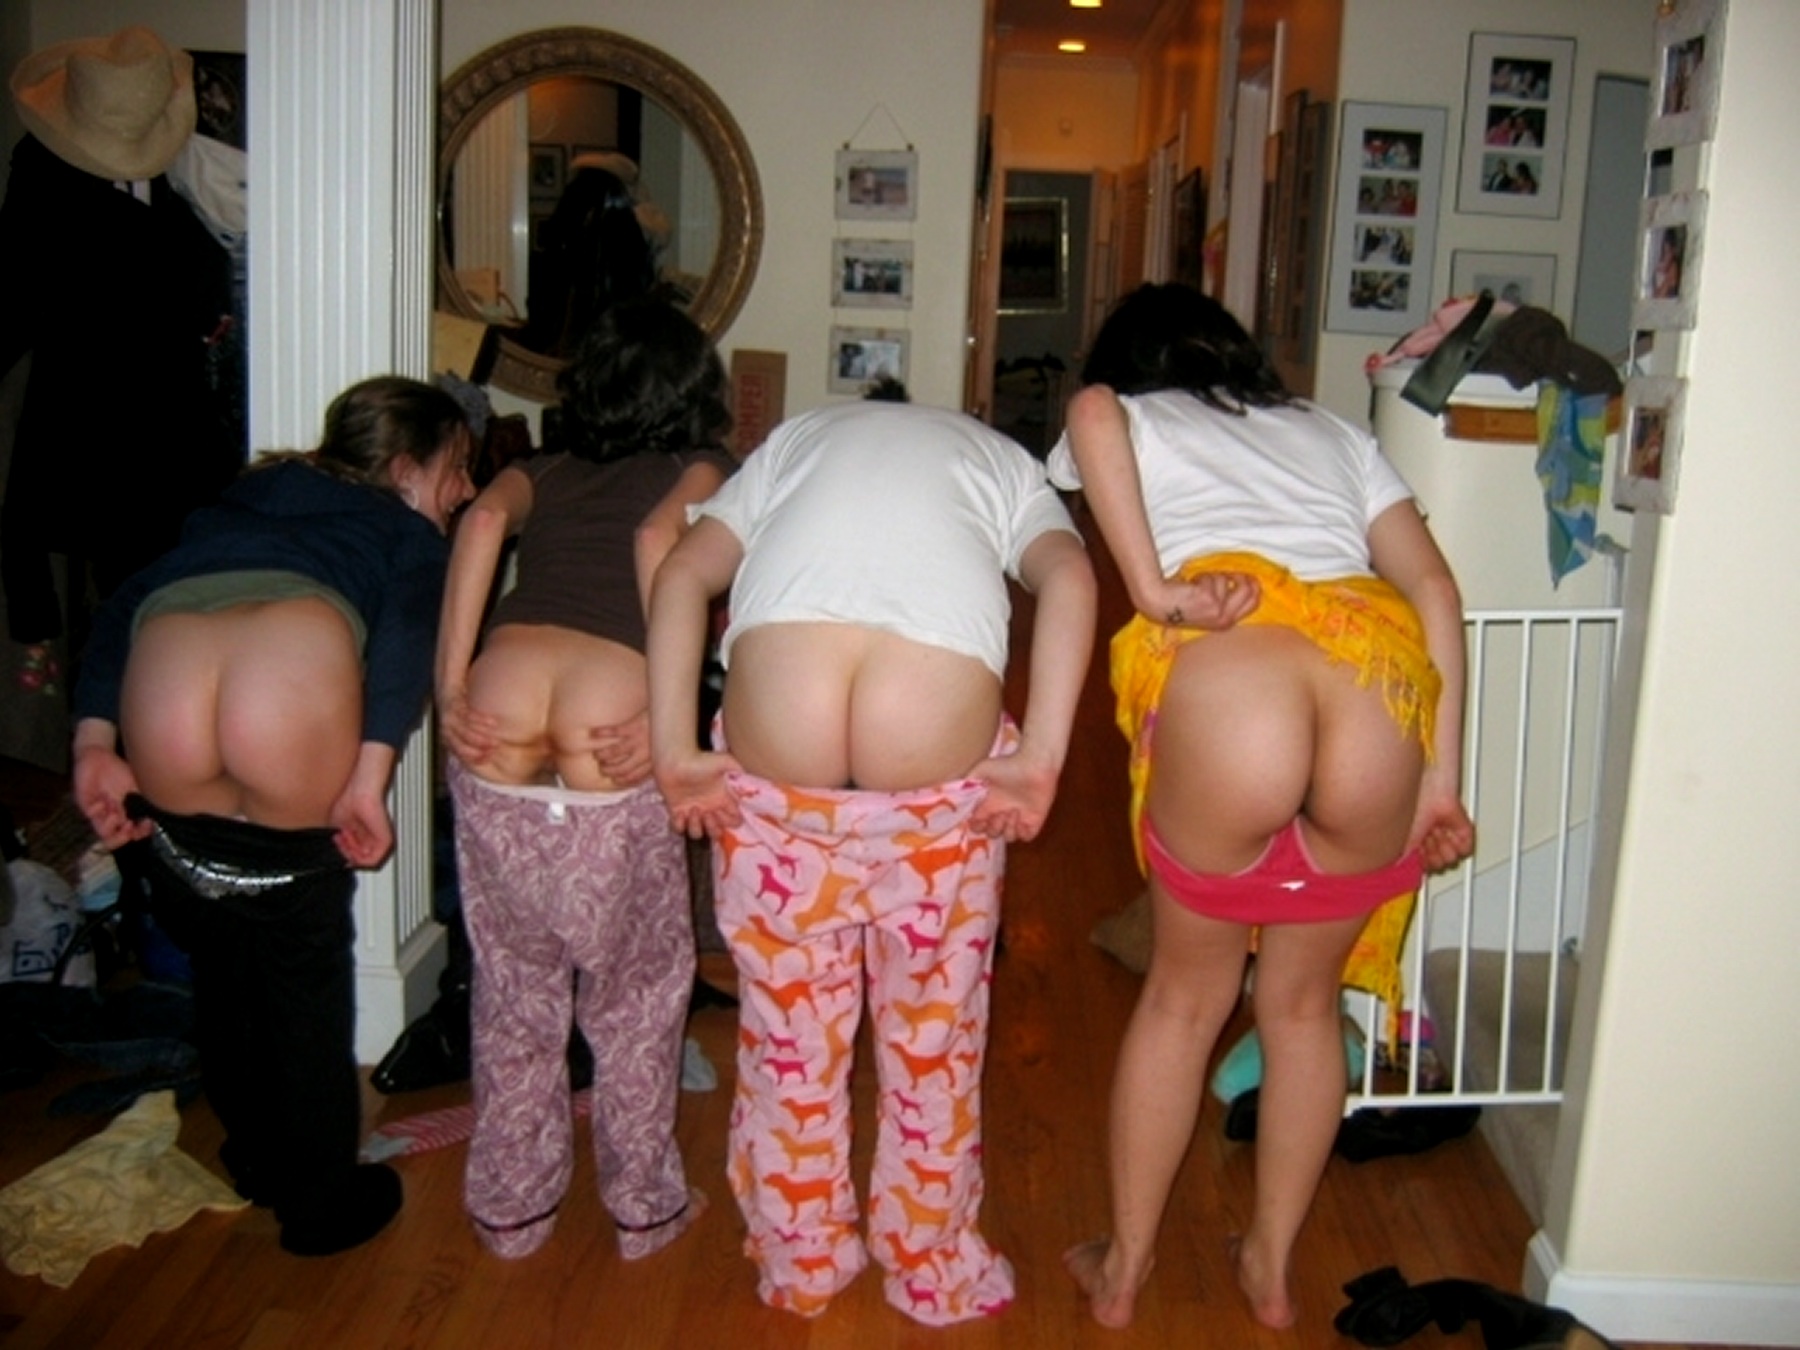 andrew kinsella recommends groups of girls mooning pic